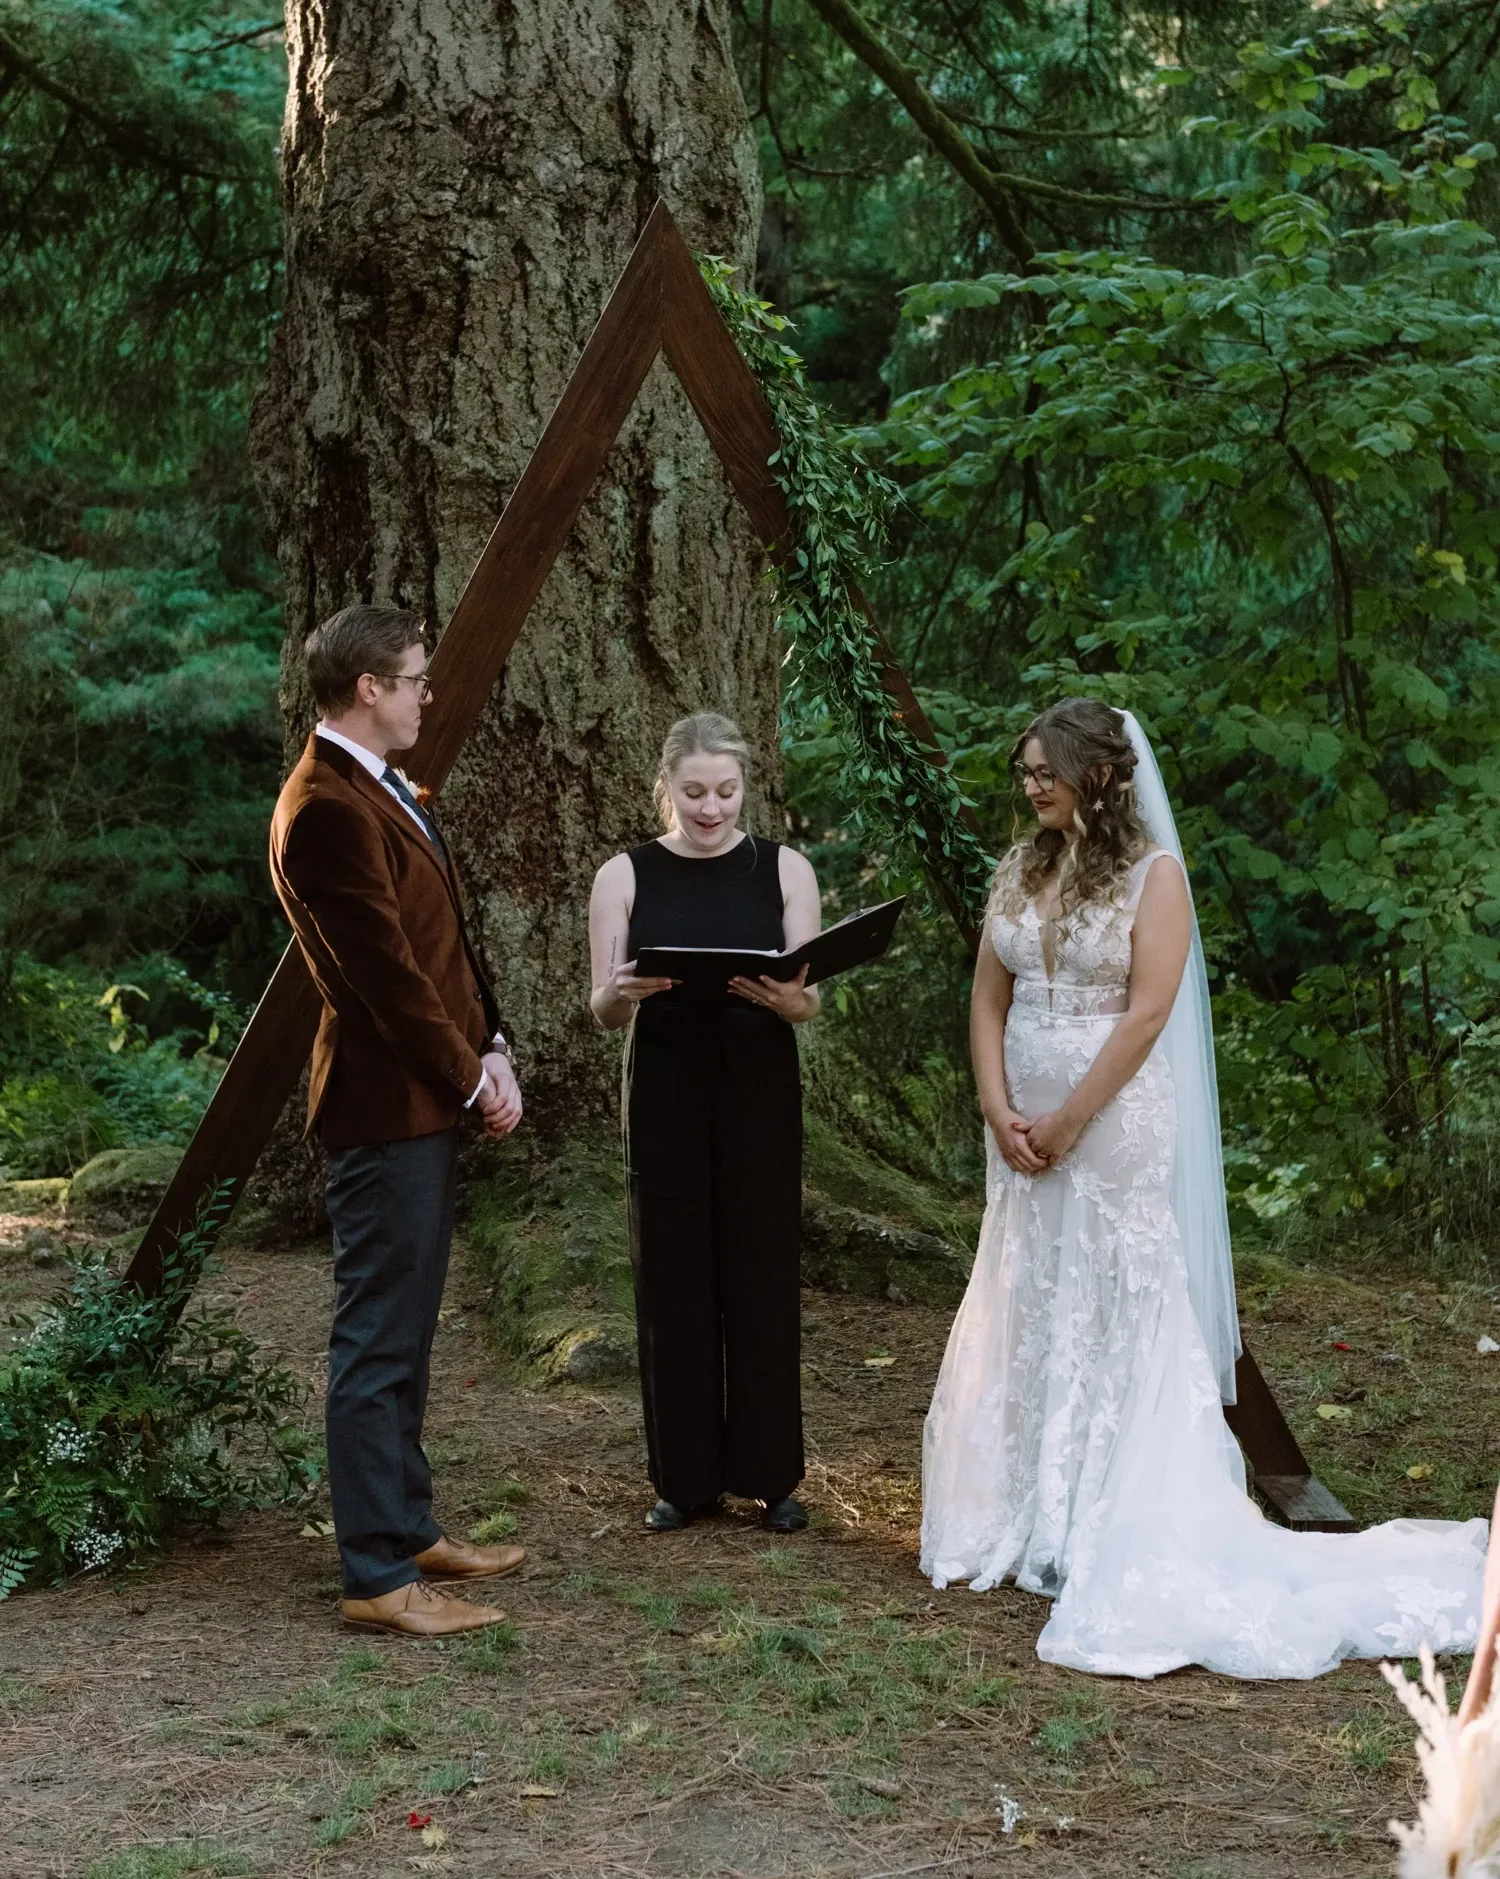 Brian & Kaitlin with Officiant Sarah S by Courtney Hellen